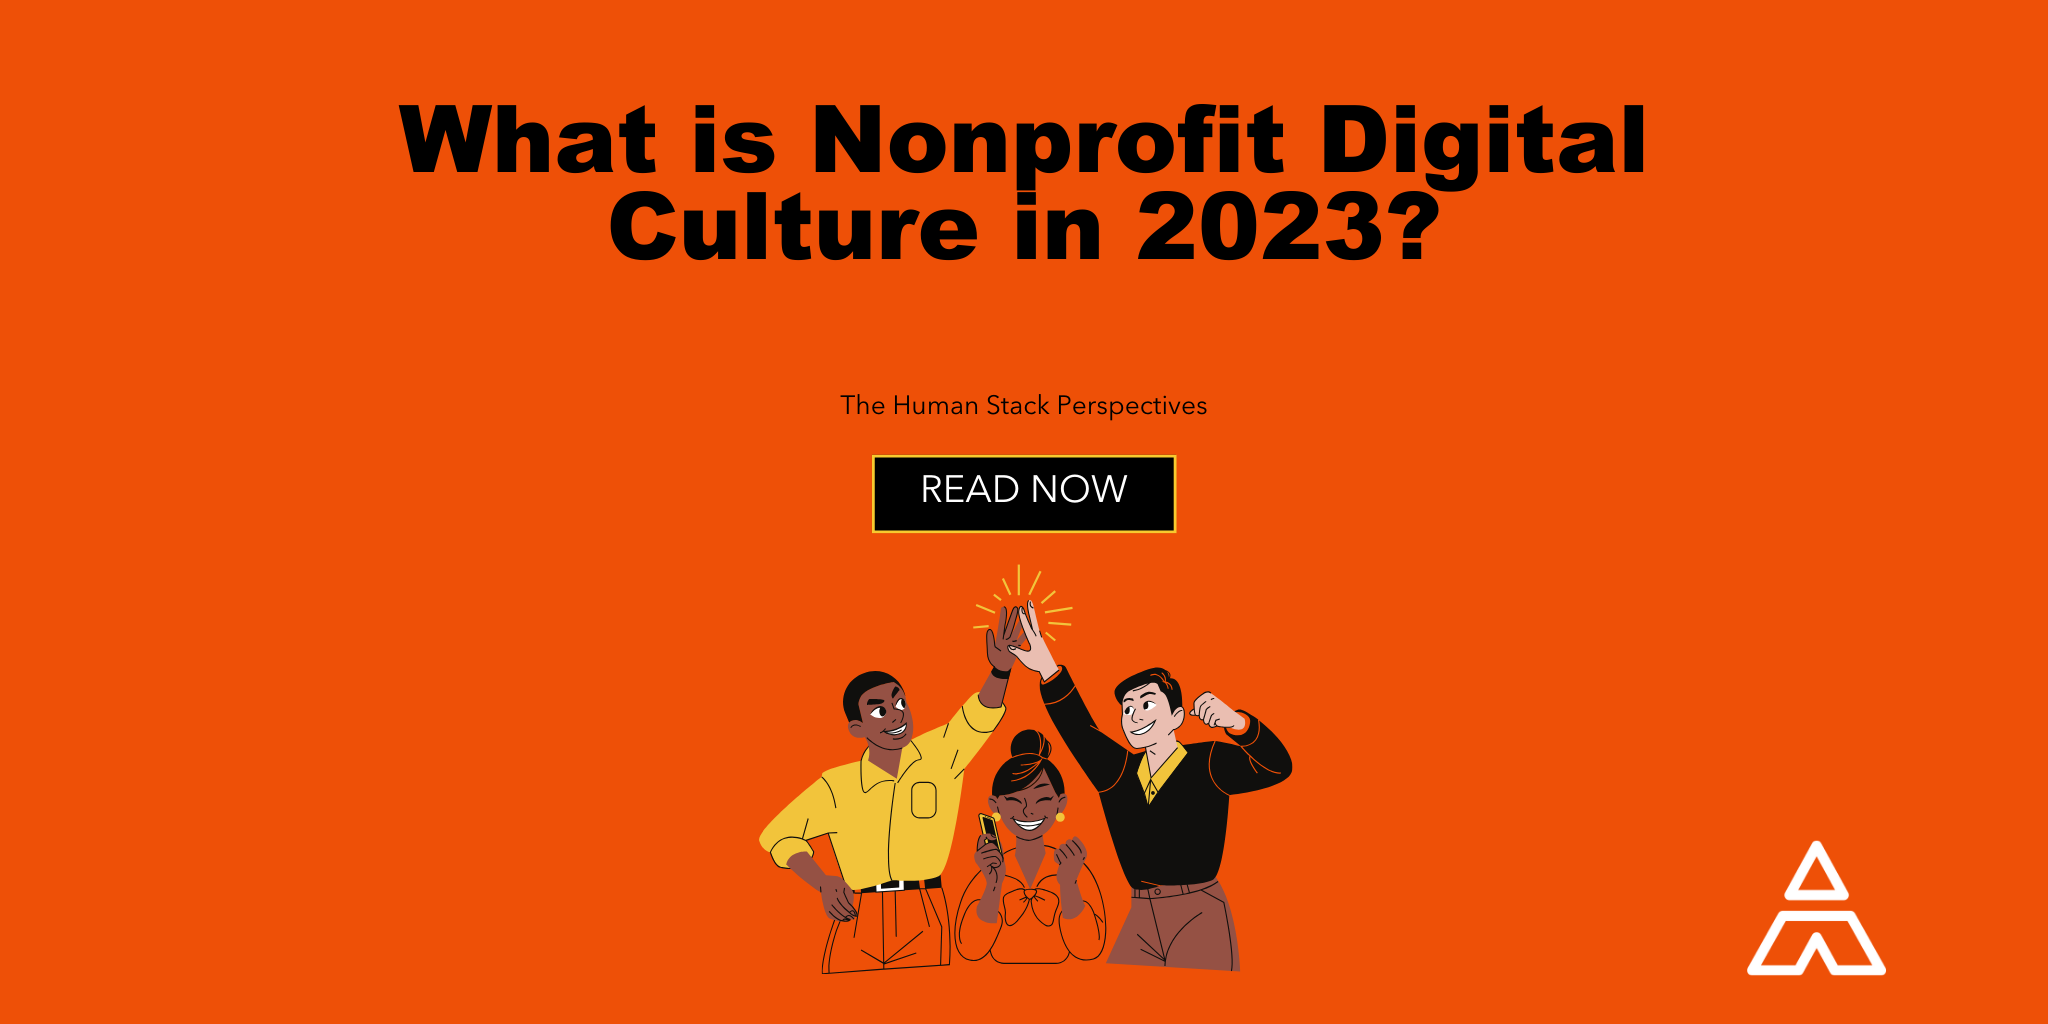 What is Nonprofit Digital Culture in 2023?